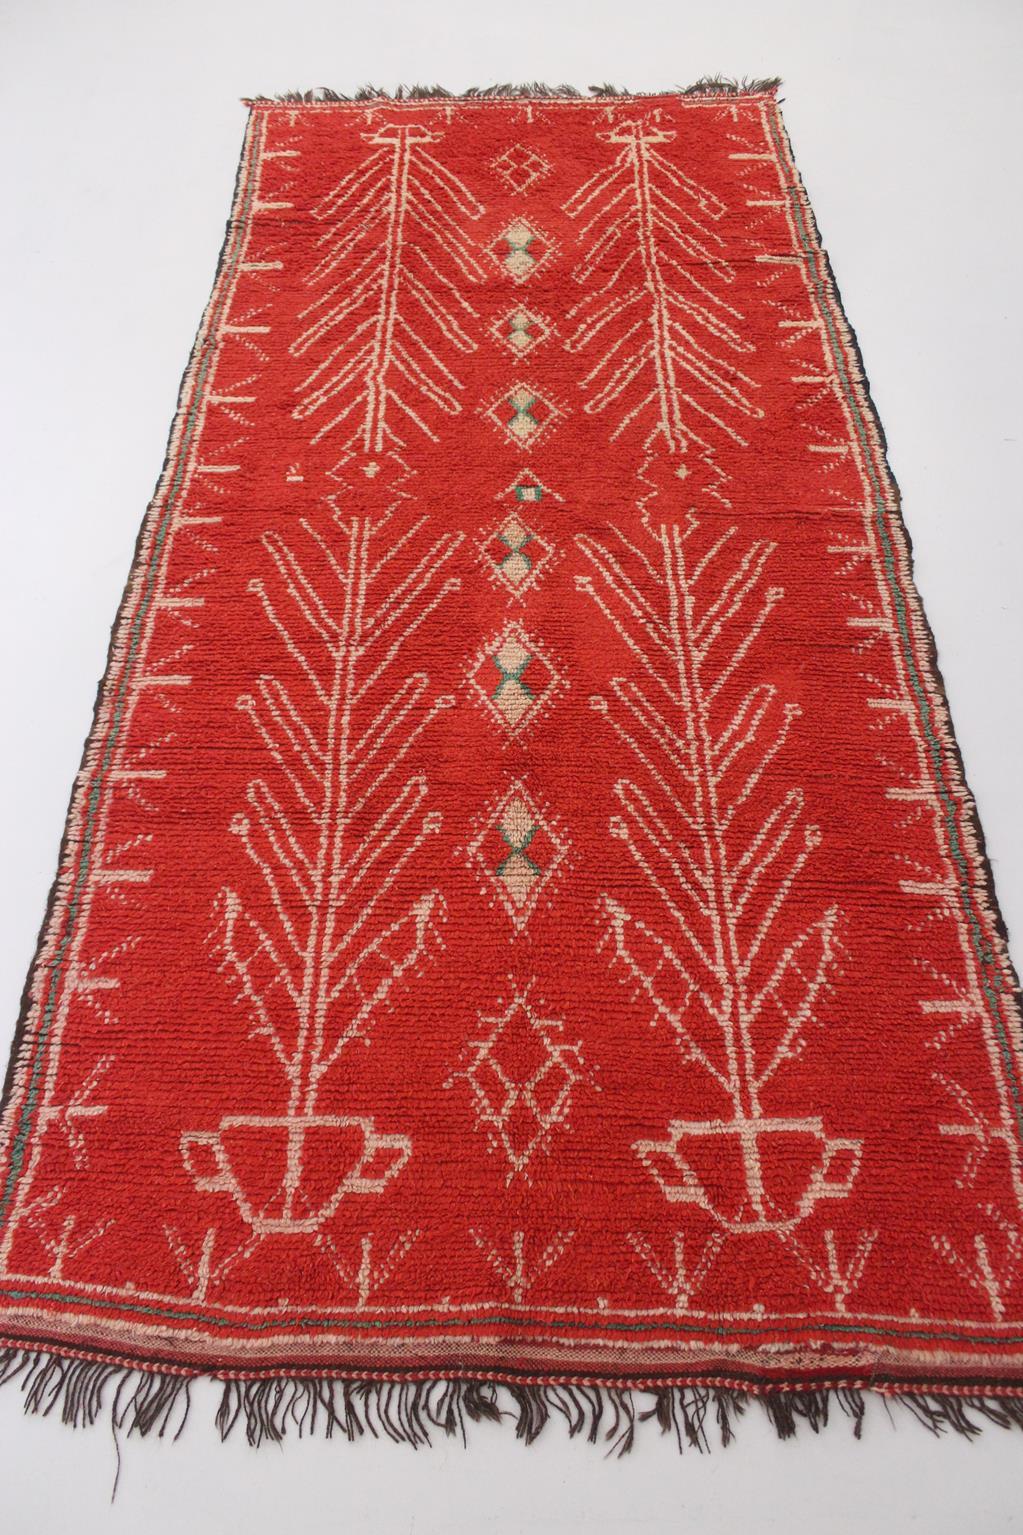 Vintage Moroccan Azilal rug - Red - 4.8x10.7feet / 148x328cm For Sale 3